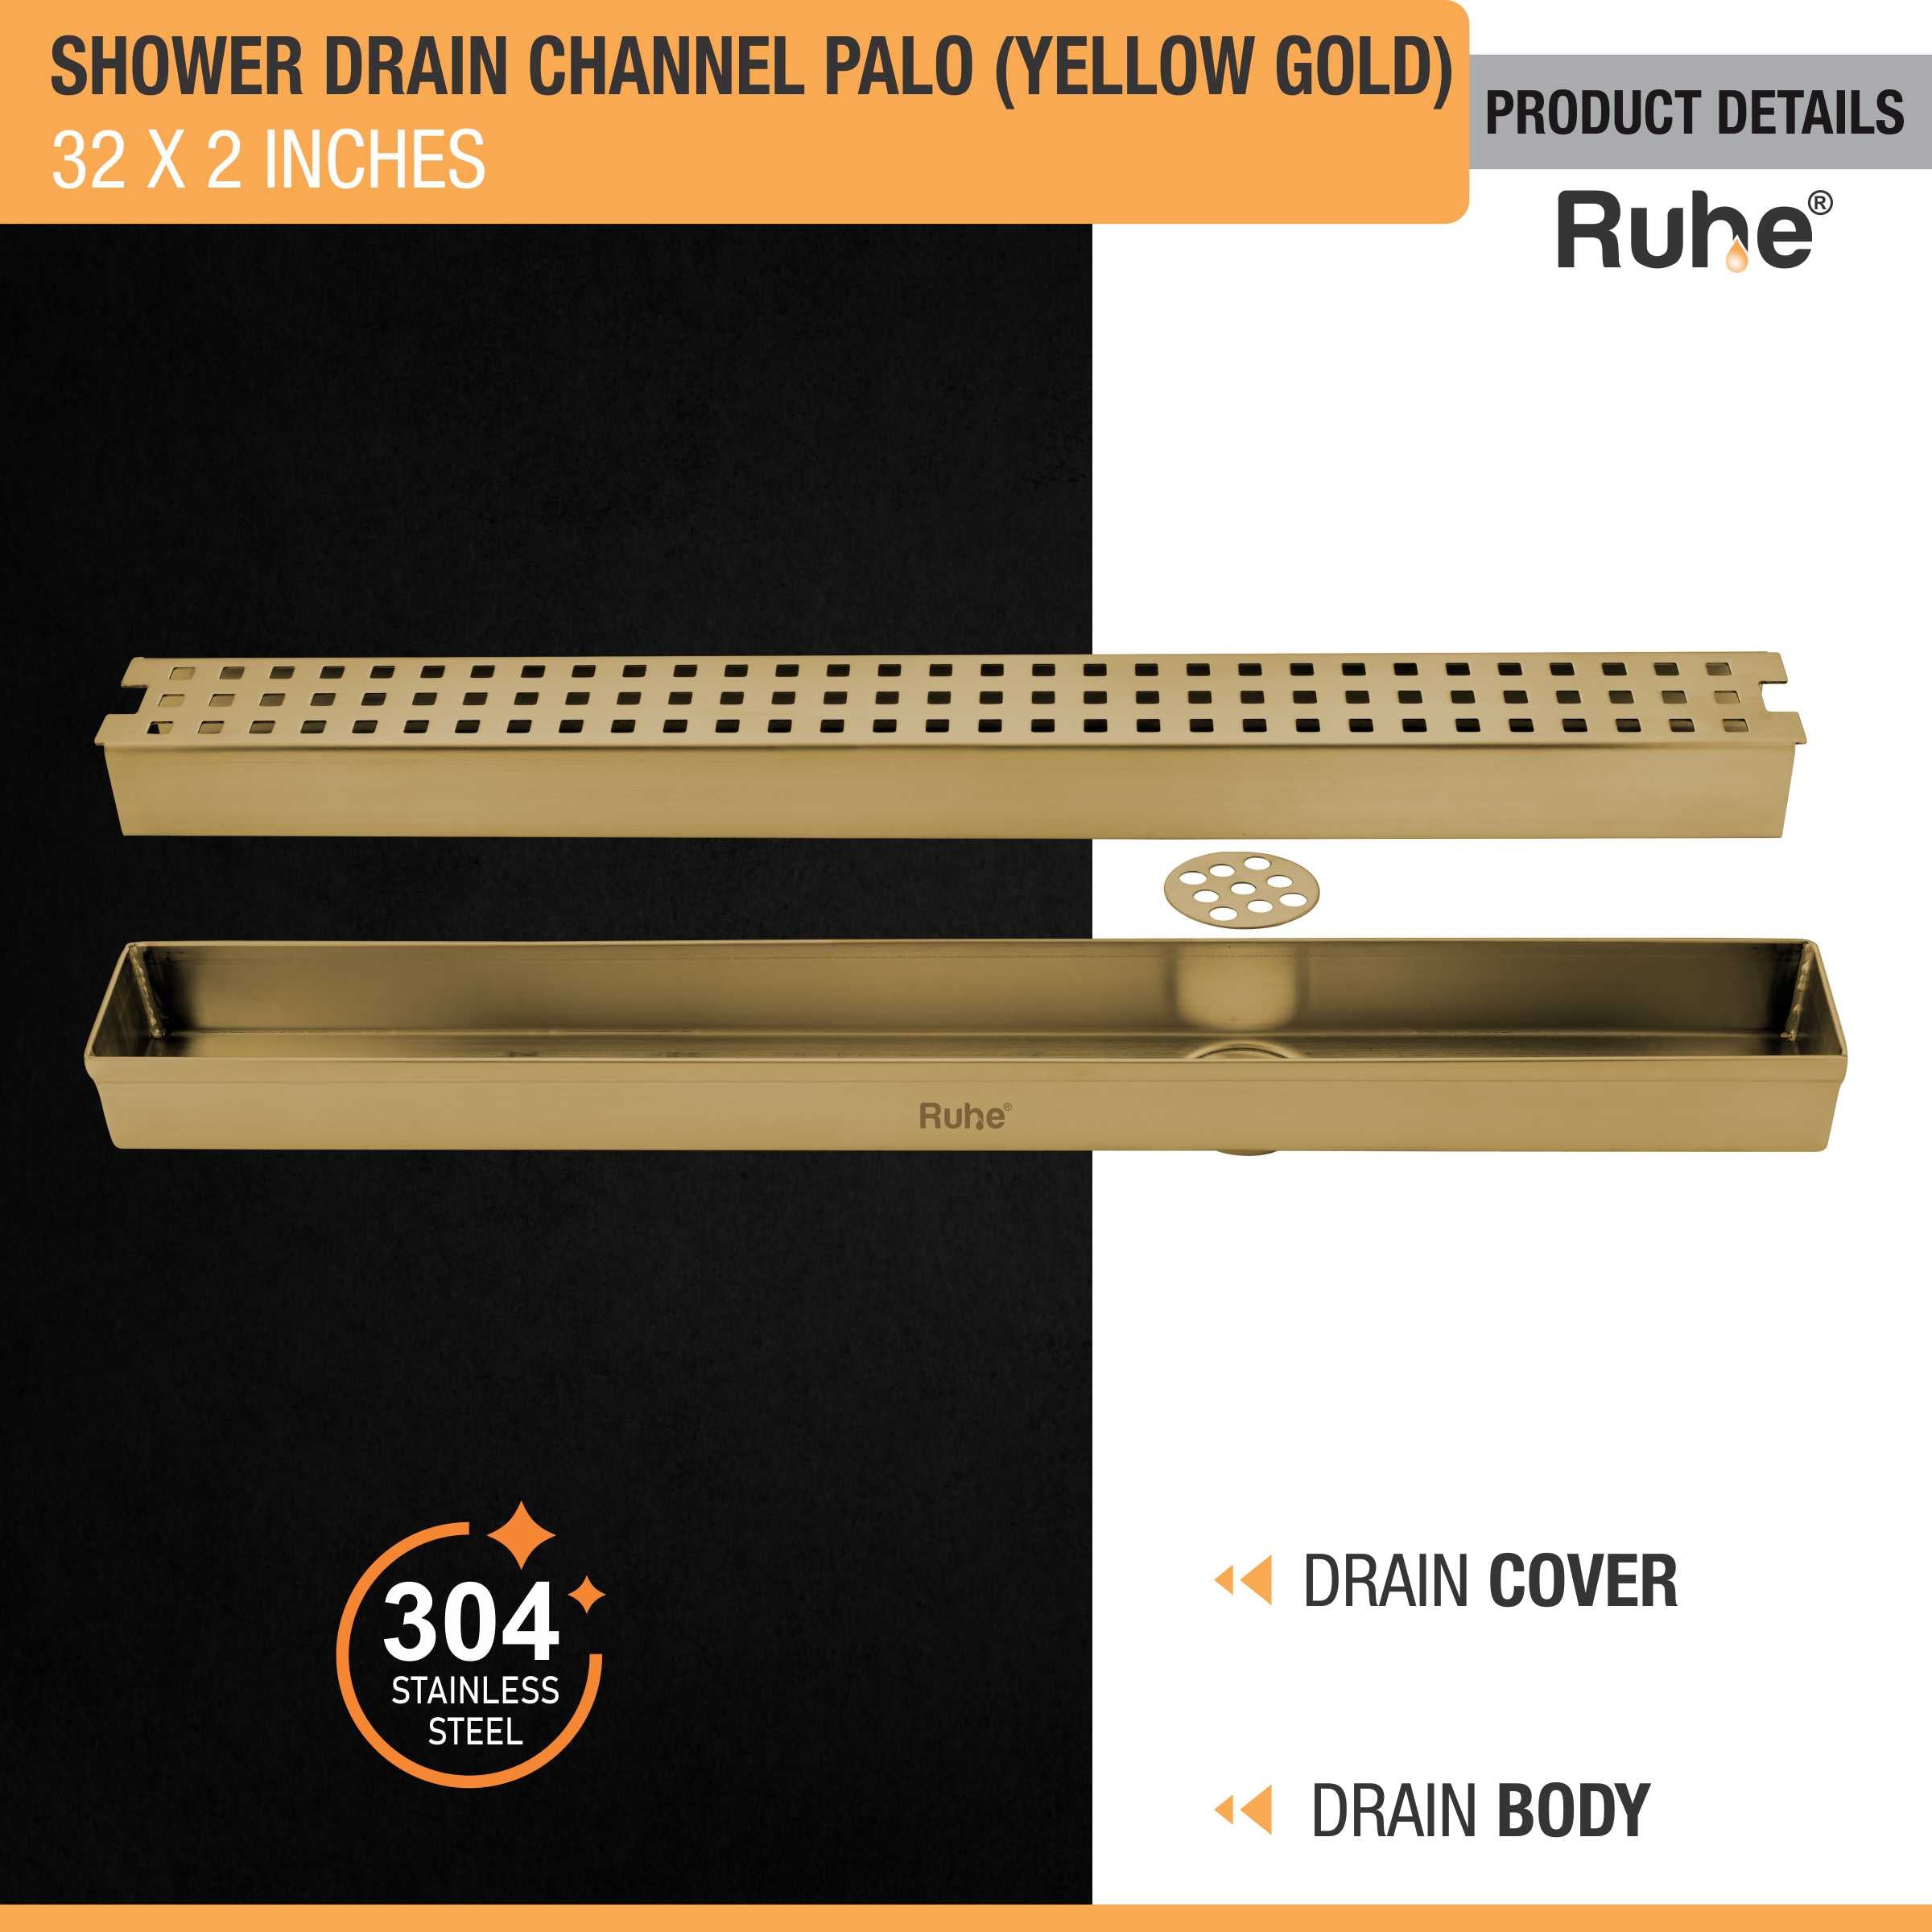 Palo Shower Drain Channel (32 x 2 Inches) YELLOW GOLD product details